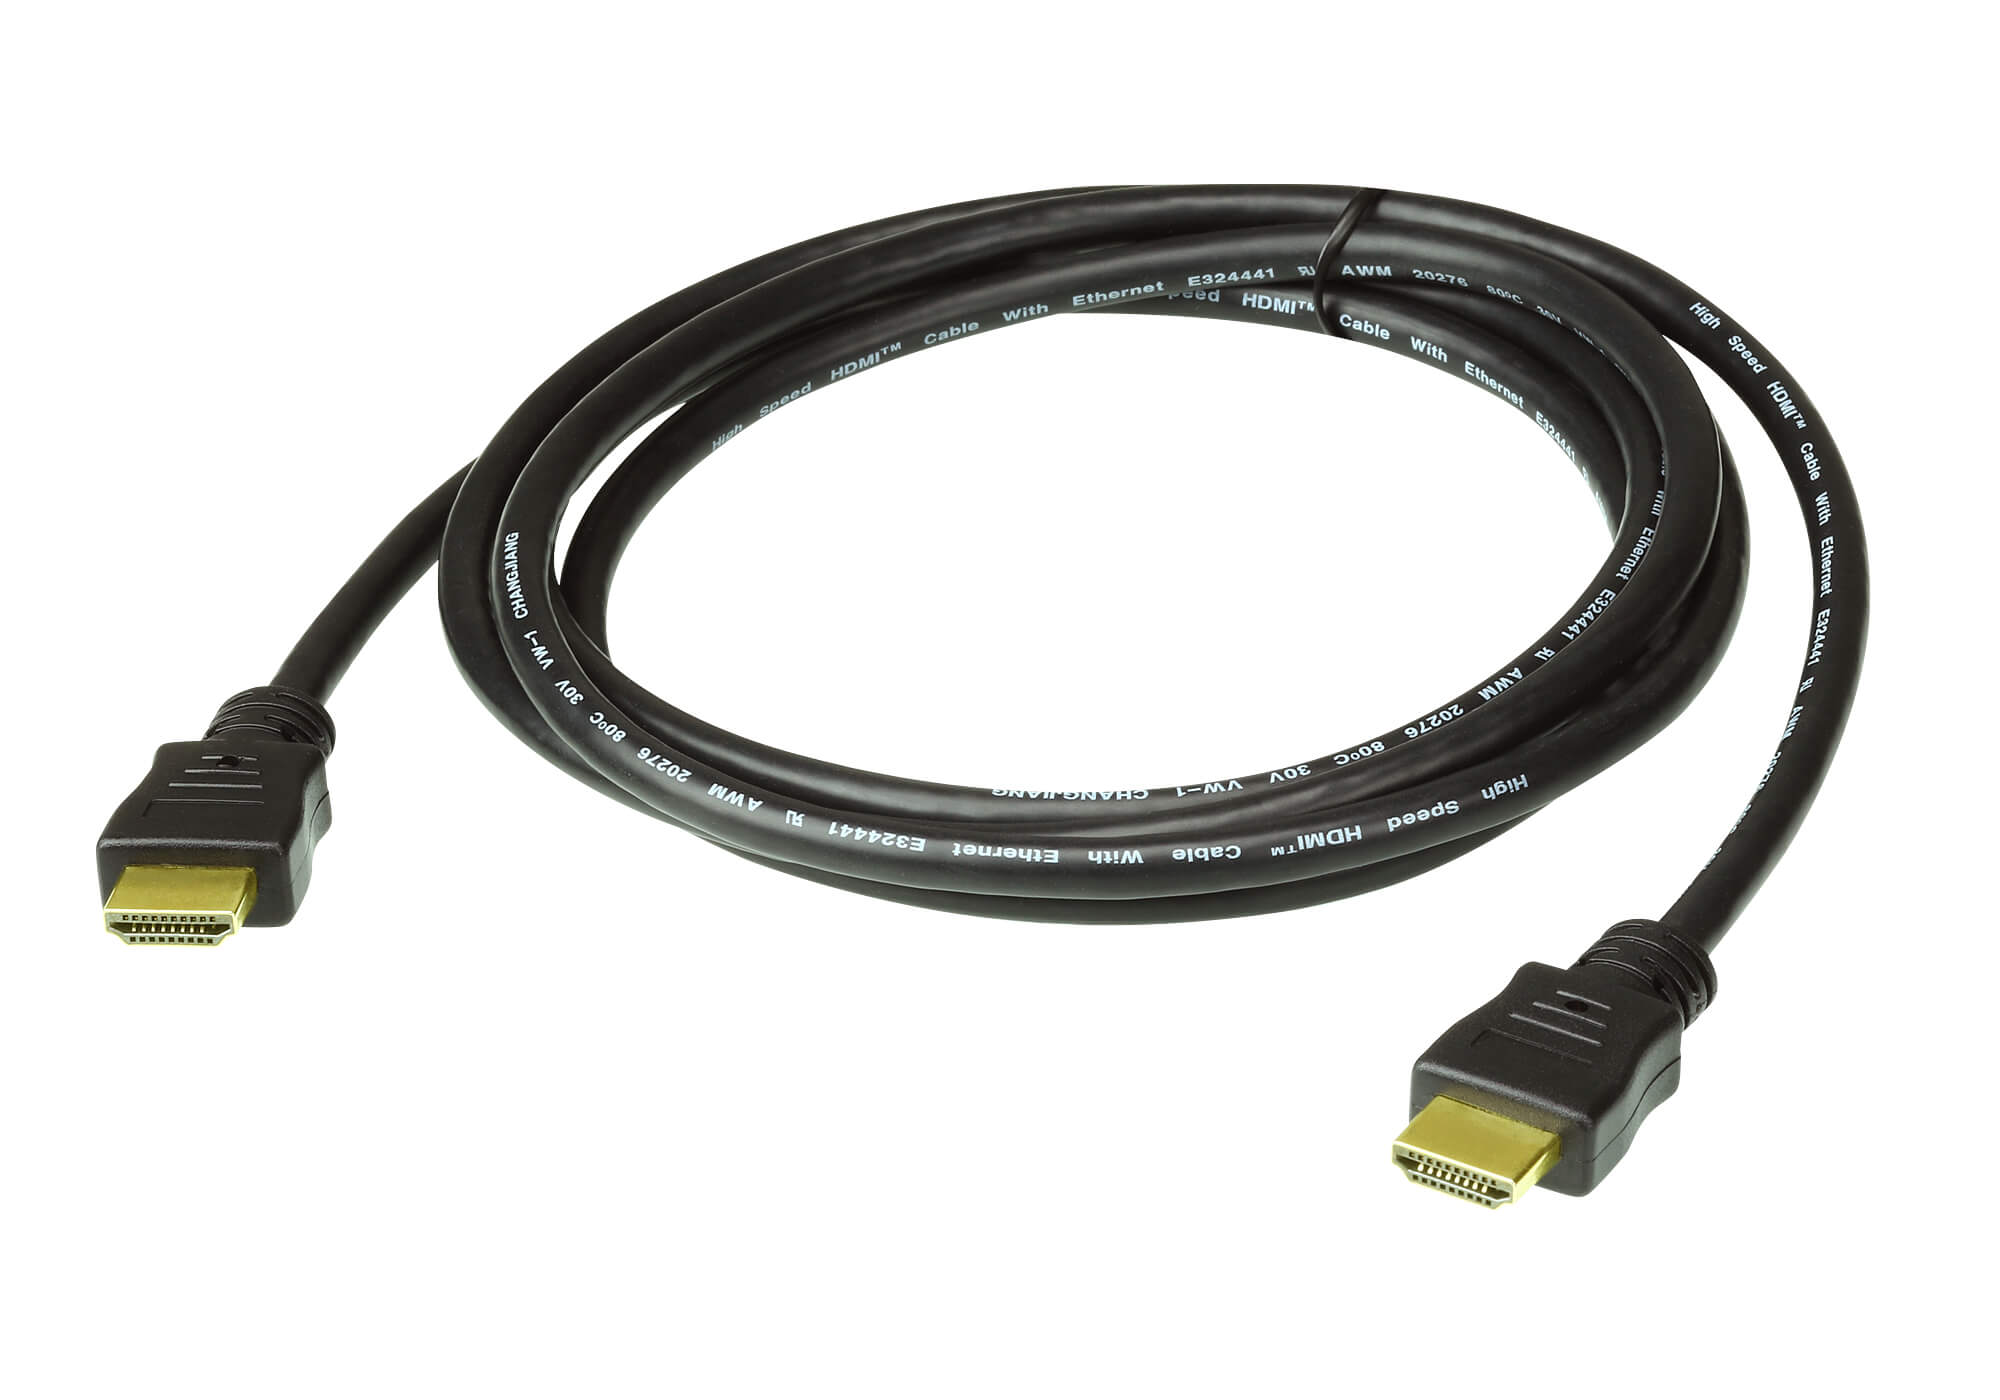 KVM Switches/Aten: Aten, 3M, High, Speed, HDMI, Cable, with, Ethernet., Support, 4K, UHD, DCI, up, to, 4096, x, 2160, @, 60Hz, 